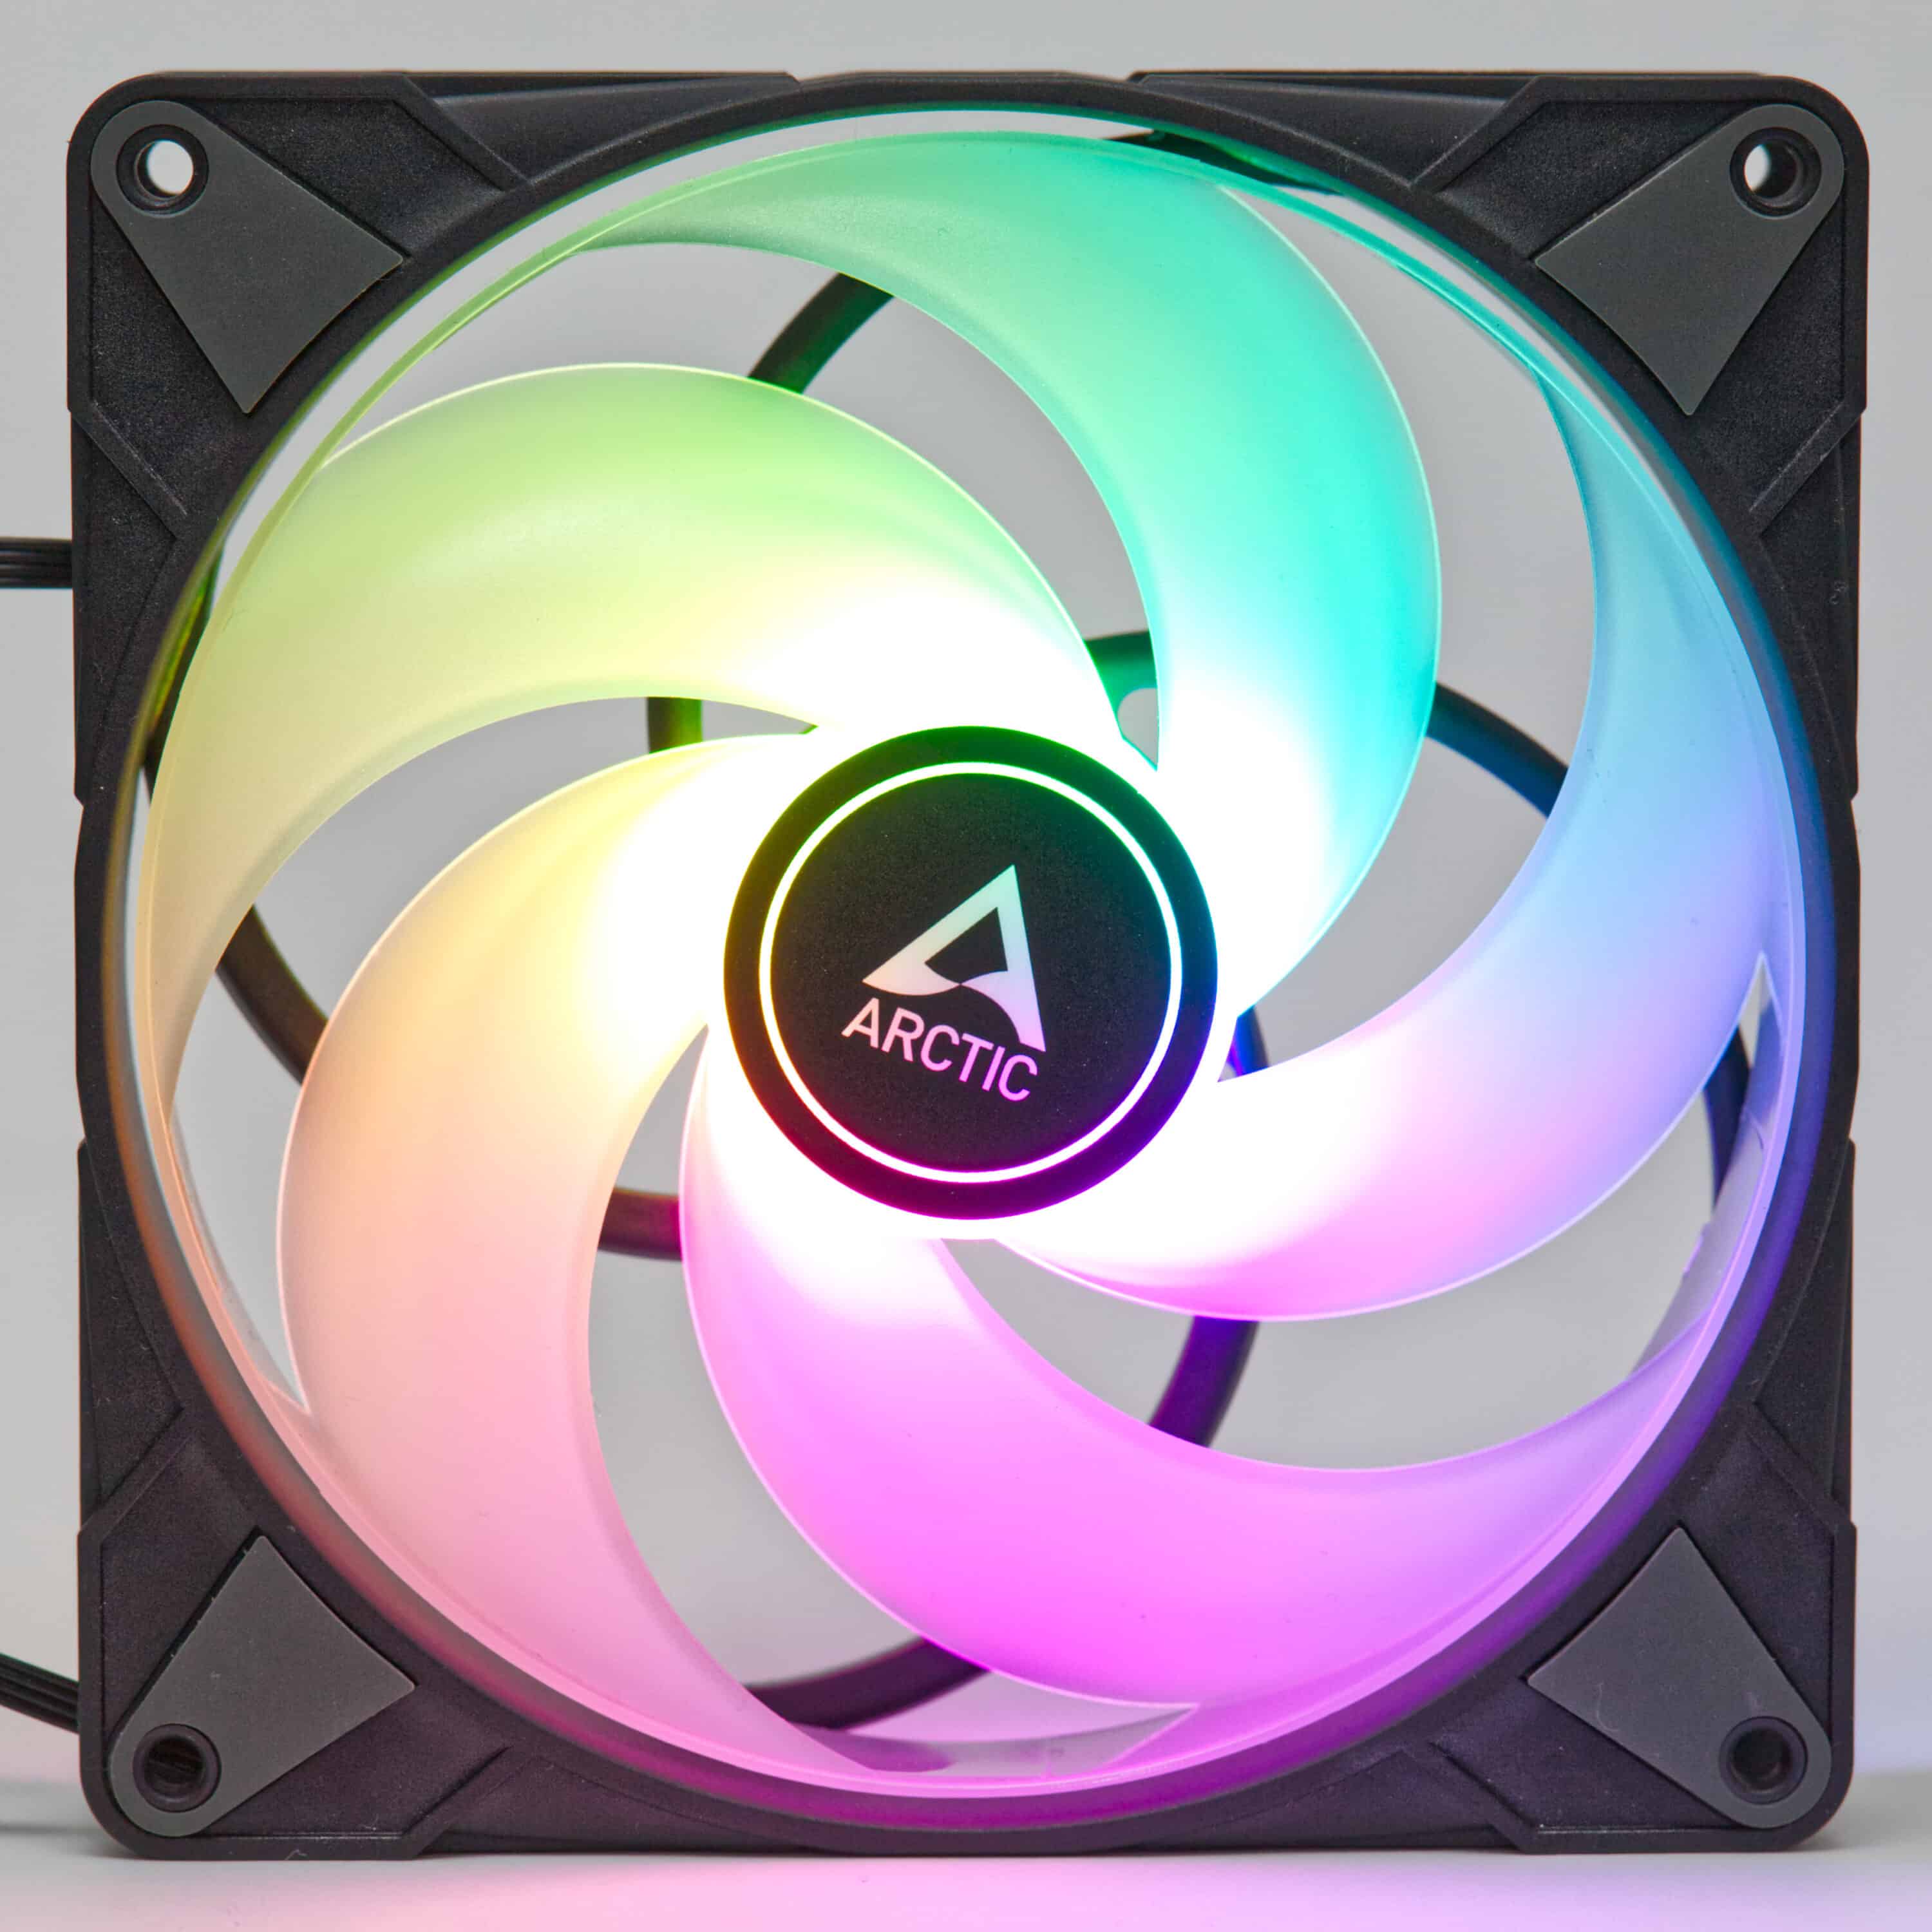 P14 PWM PST A-RGB, 140 mm A-RGB PWM Fan with Cable Splitter